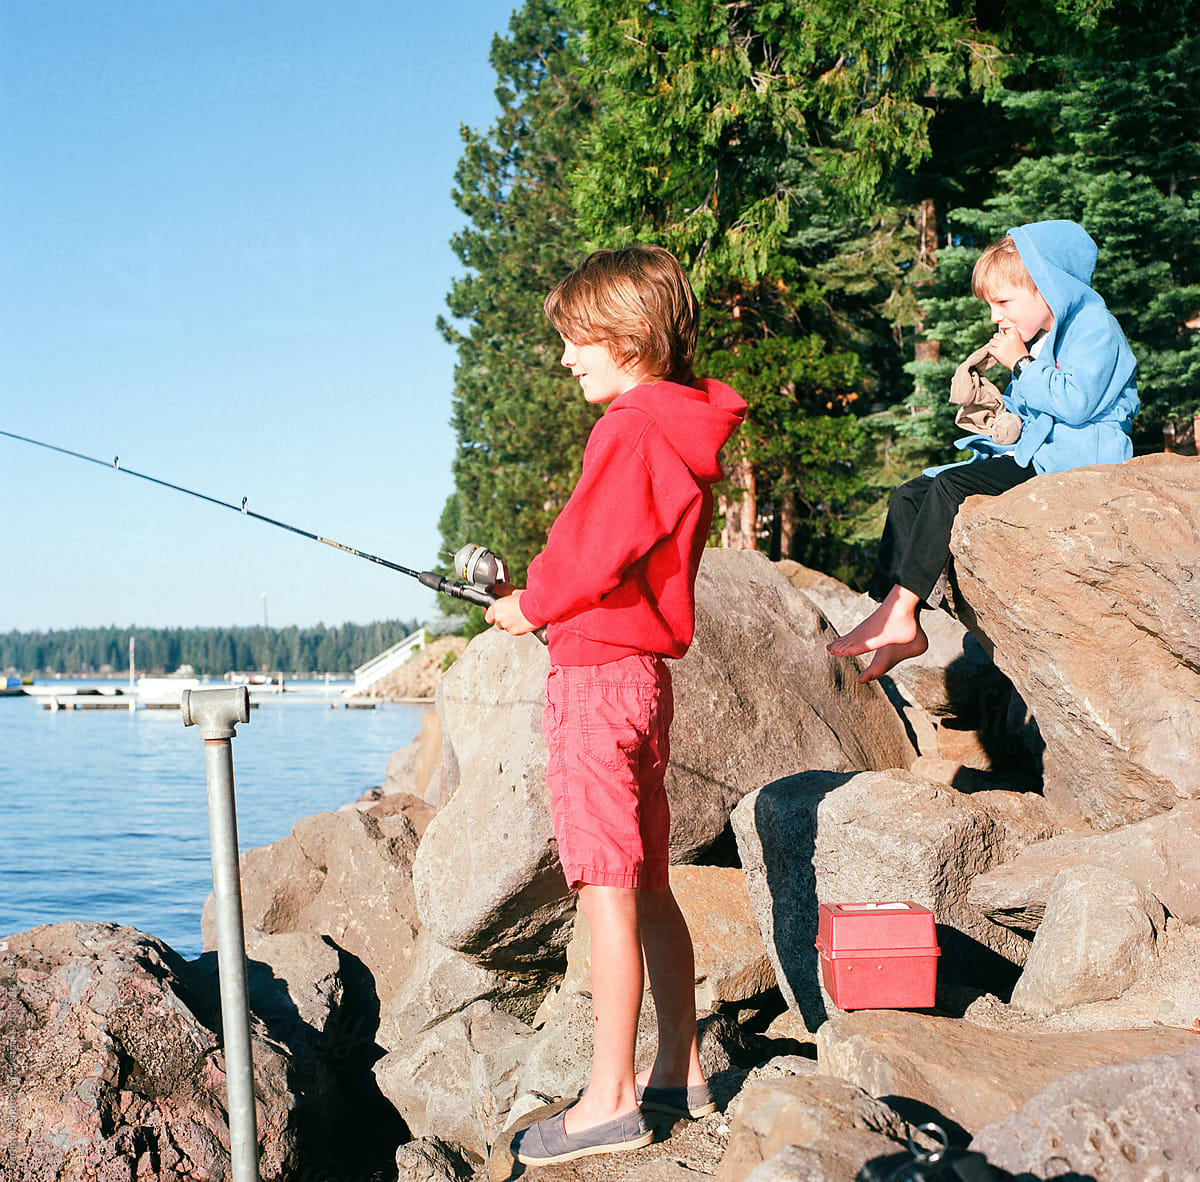 Young boy fishing on Lake Almanor while little brother watches